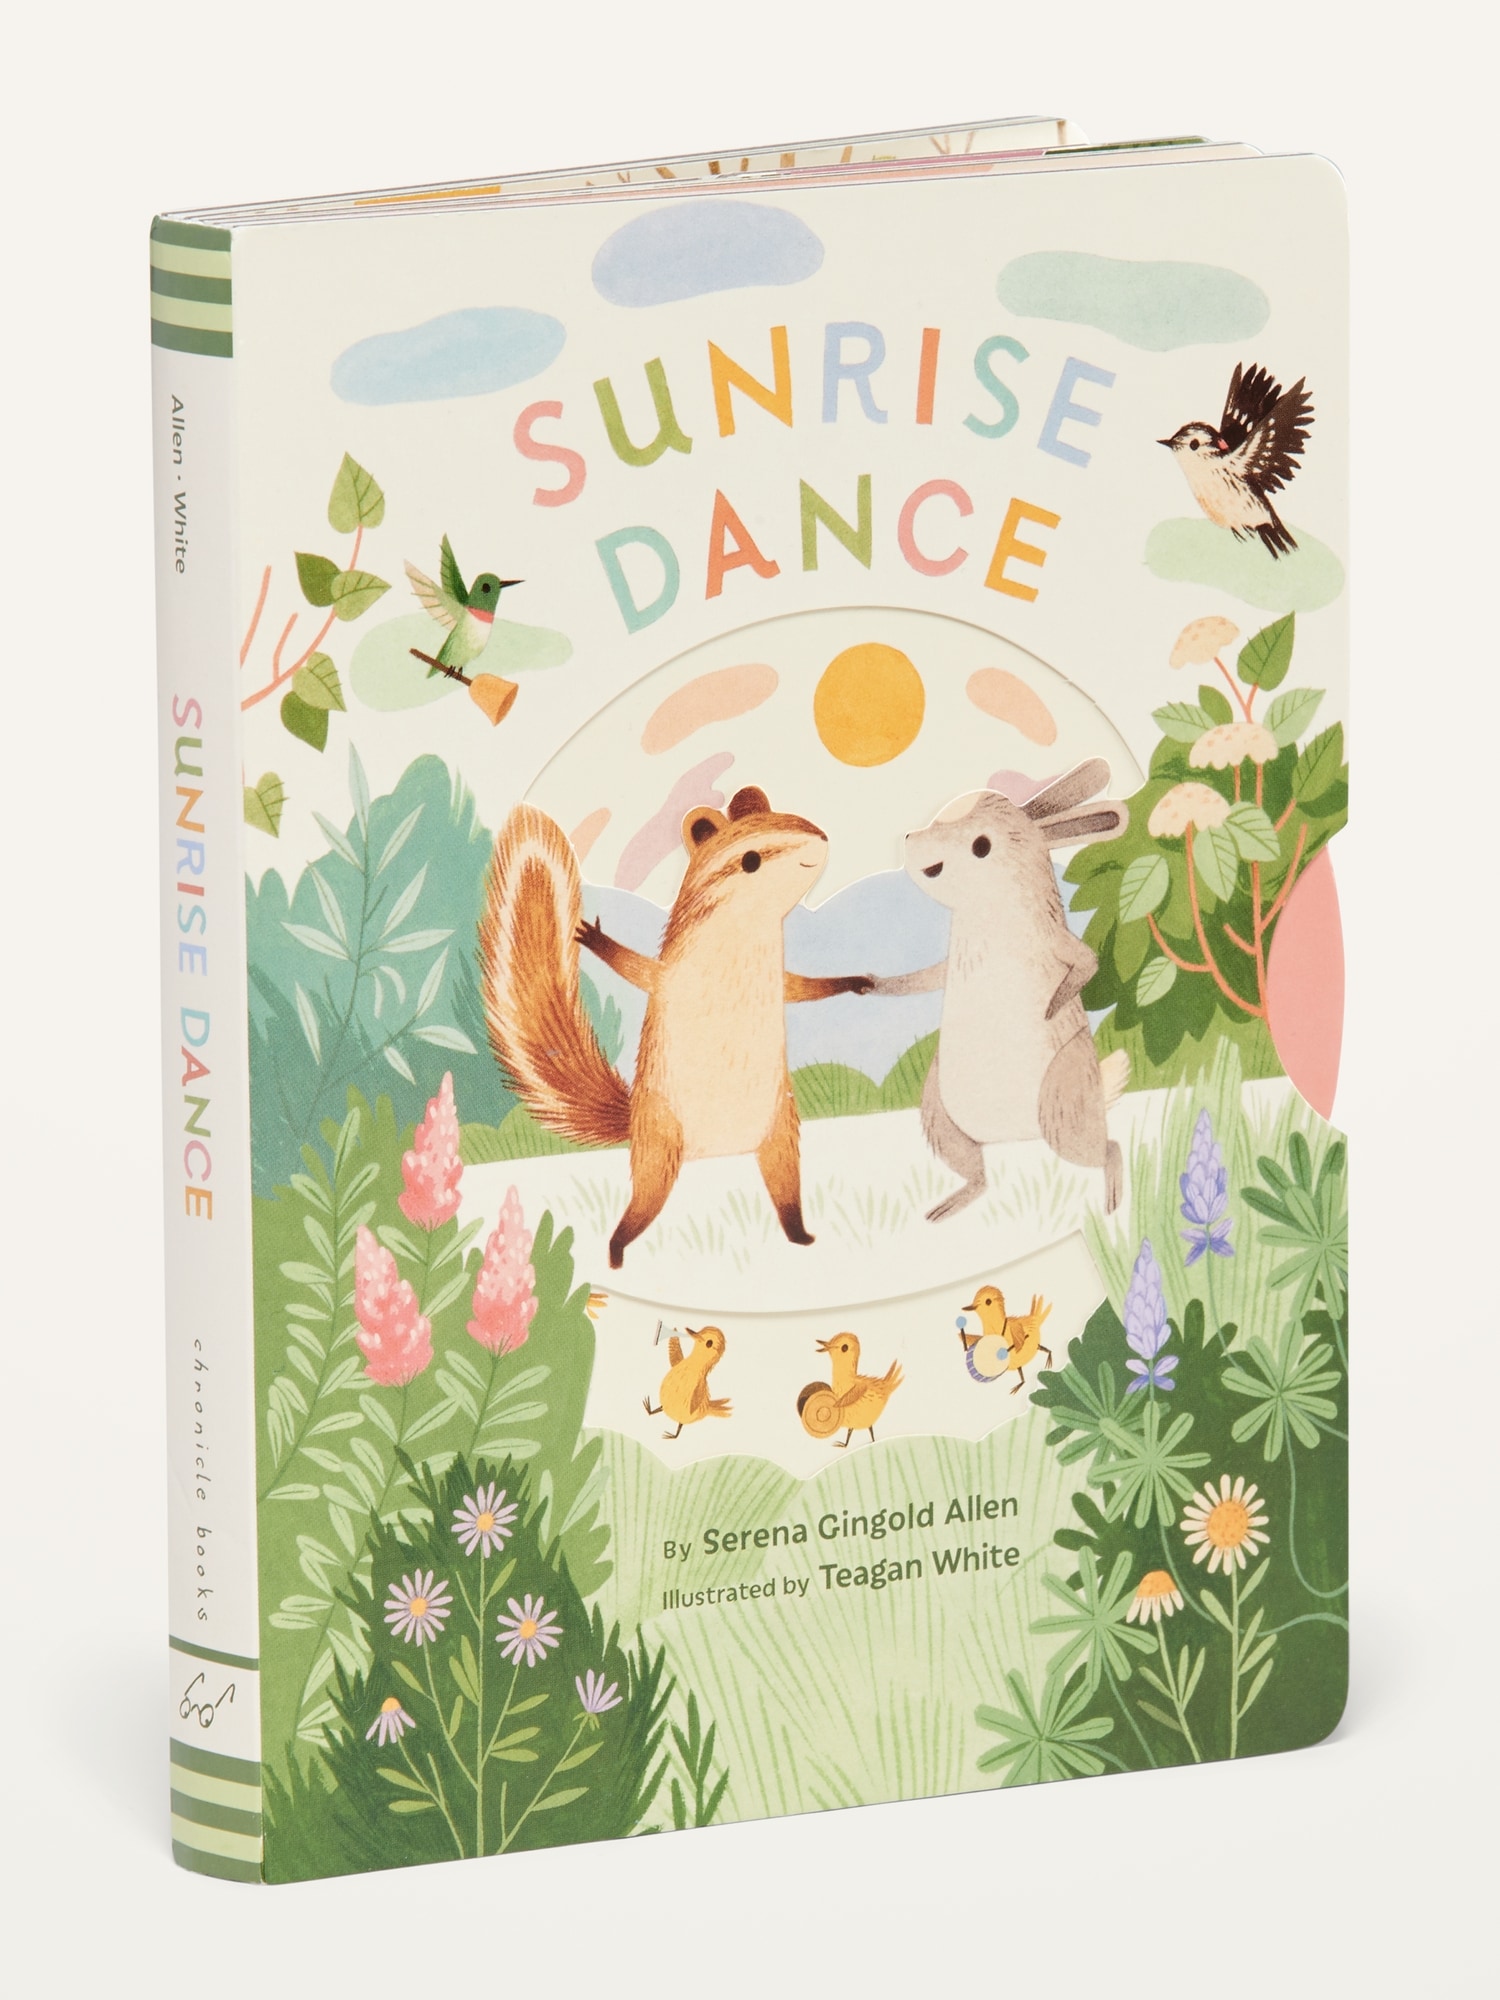 Old Navy "Sunrise Dance" Interactive Board Book for Toddler & Baby multi. 1